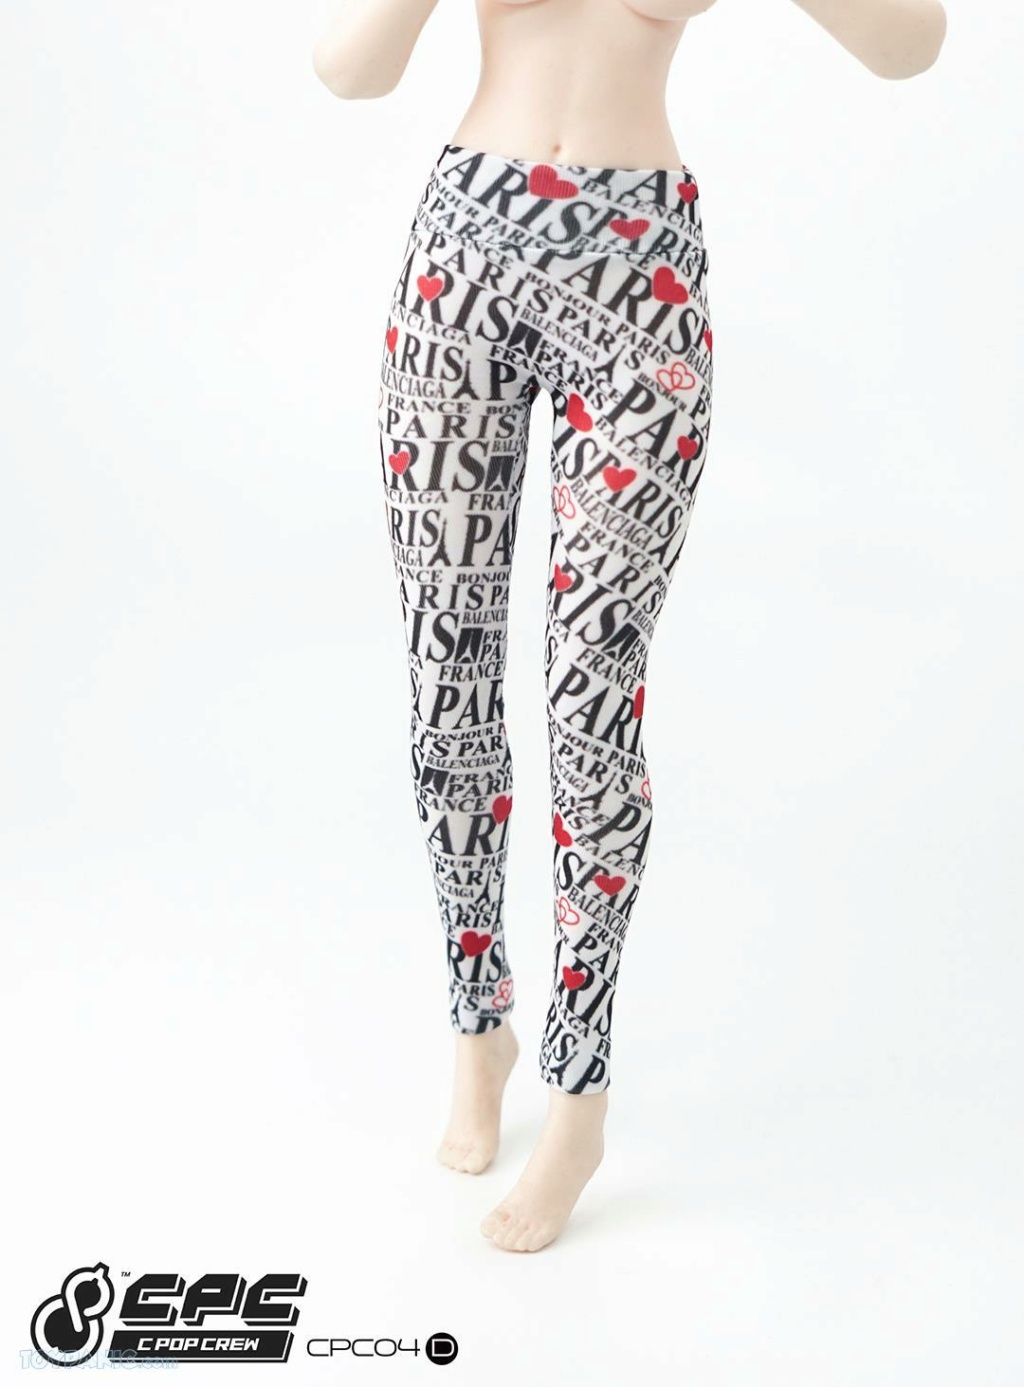 CPopCrew - NEW PRODUCT: CPop Crew: 1/6 Female Ice Silk Printed Yoga Pants (5 styles) 14720224